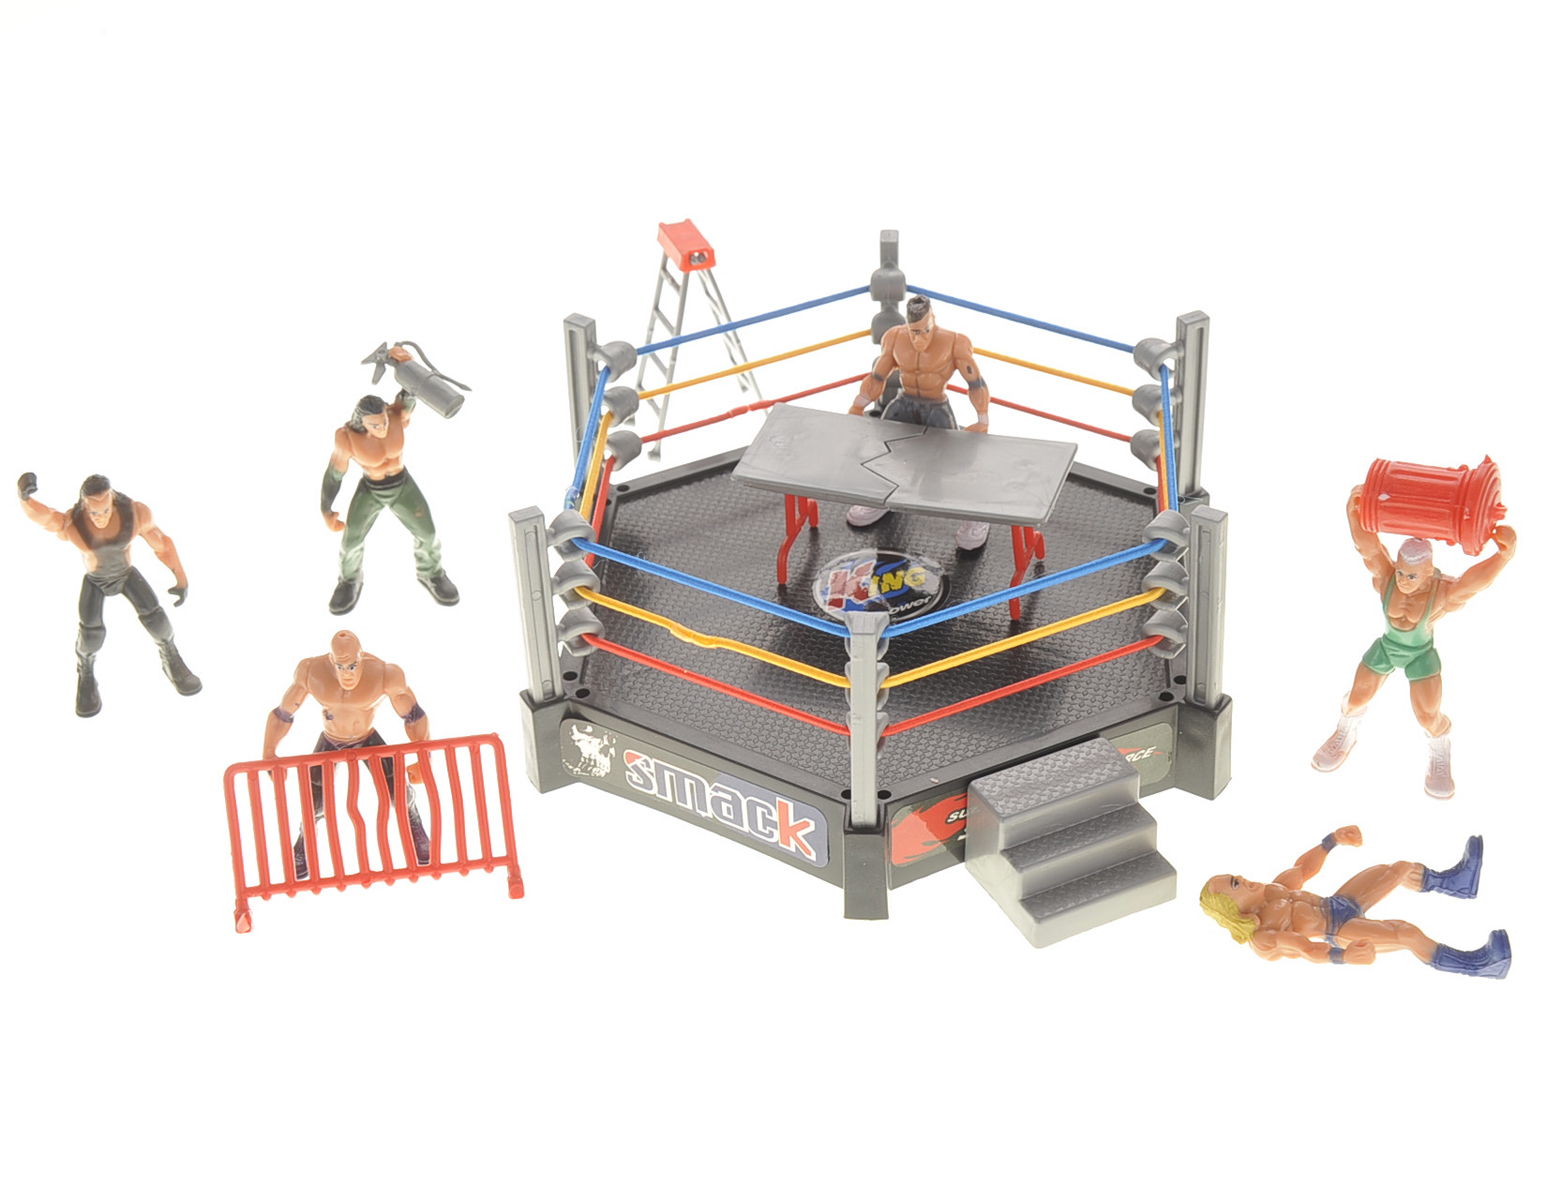 azimporter Smack, Wrestling Stage Ring With 12 Figures